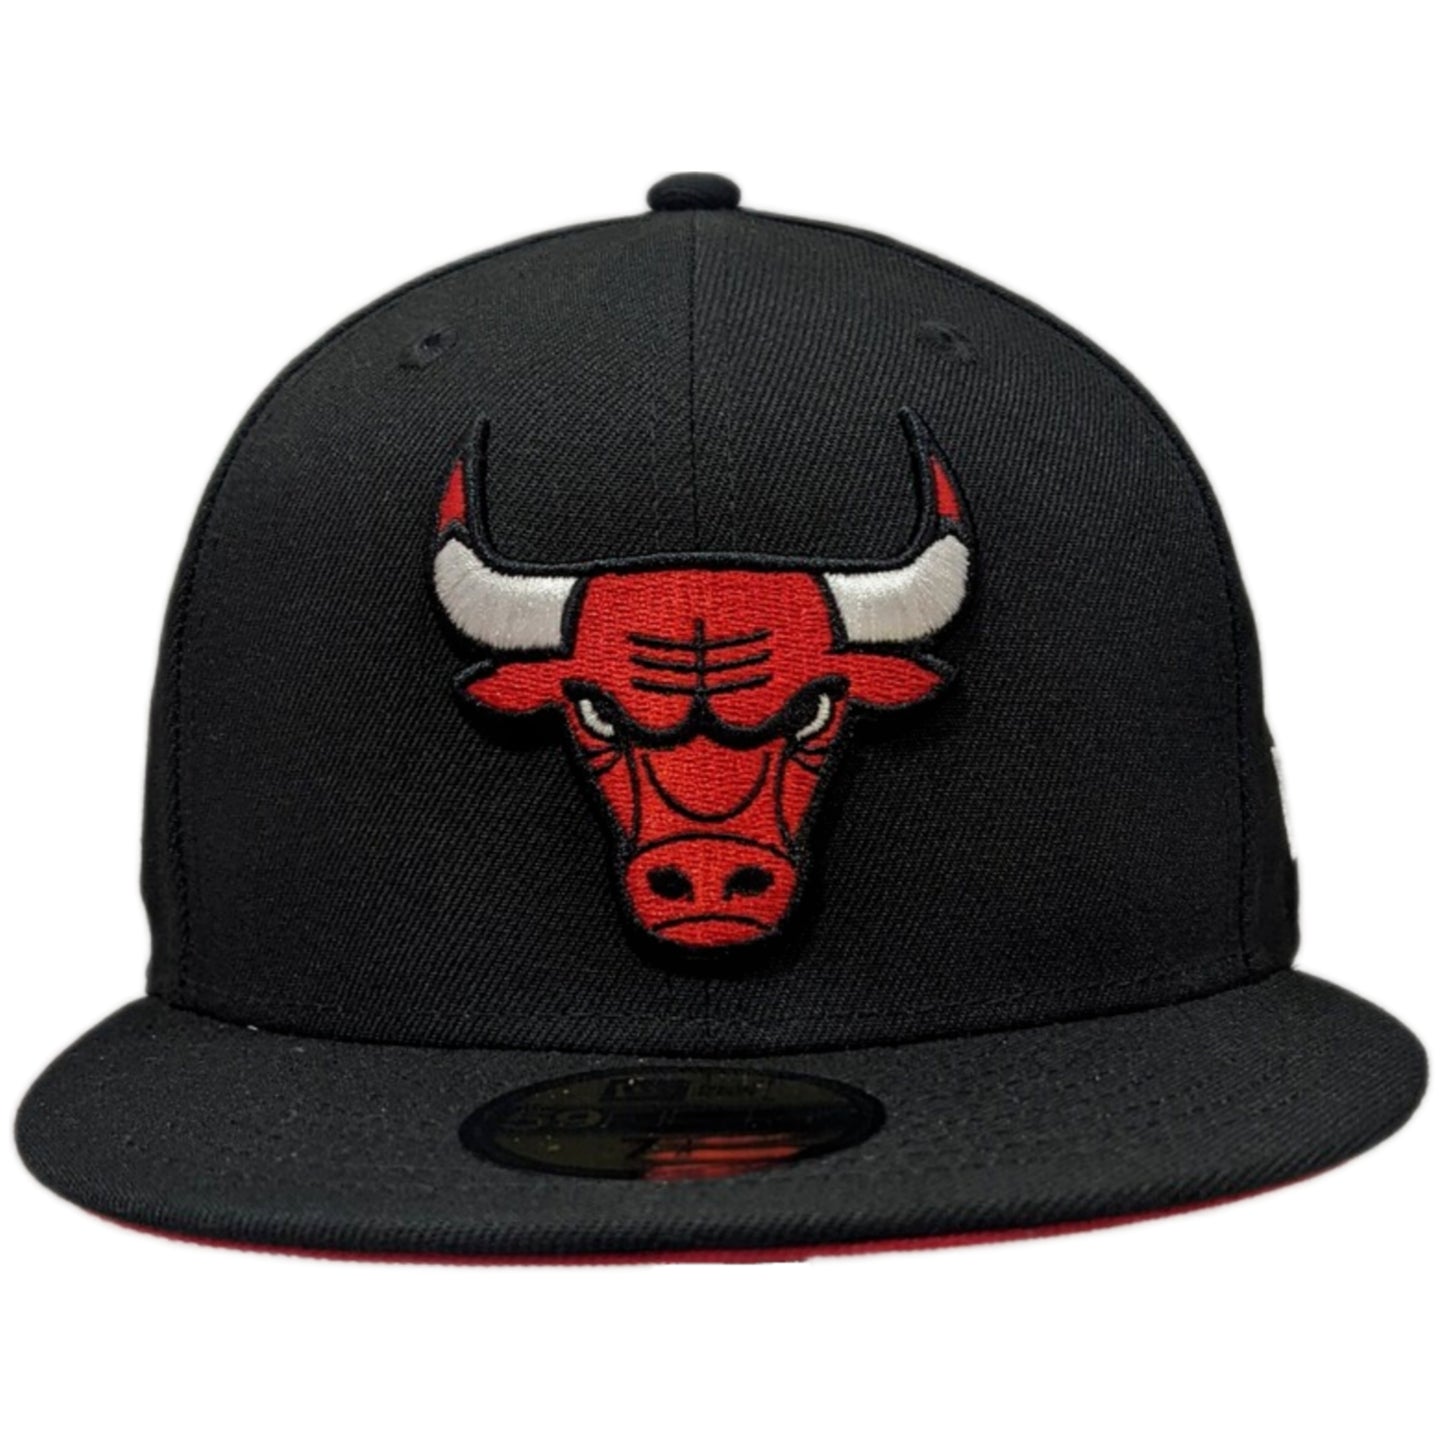 Men's Chicago Bulls Black/Red 6X Champions 59FIFTY Fitted Hat